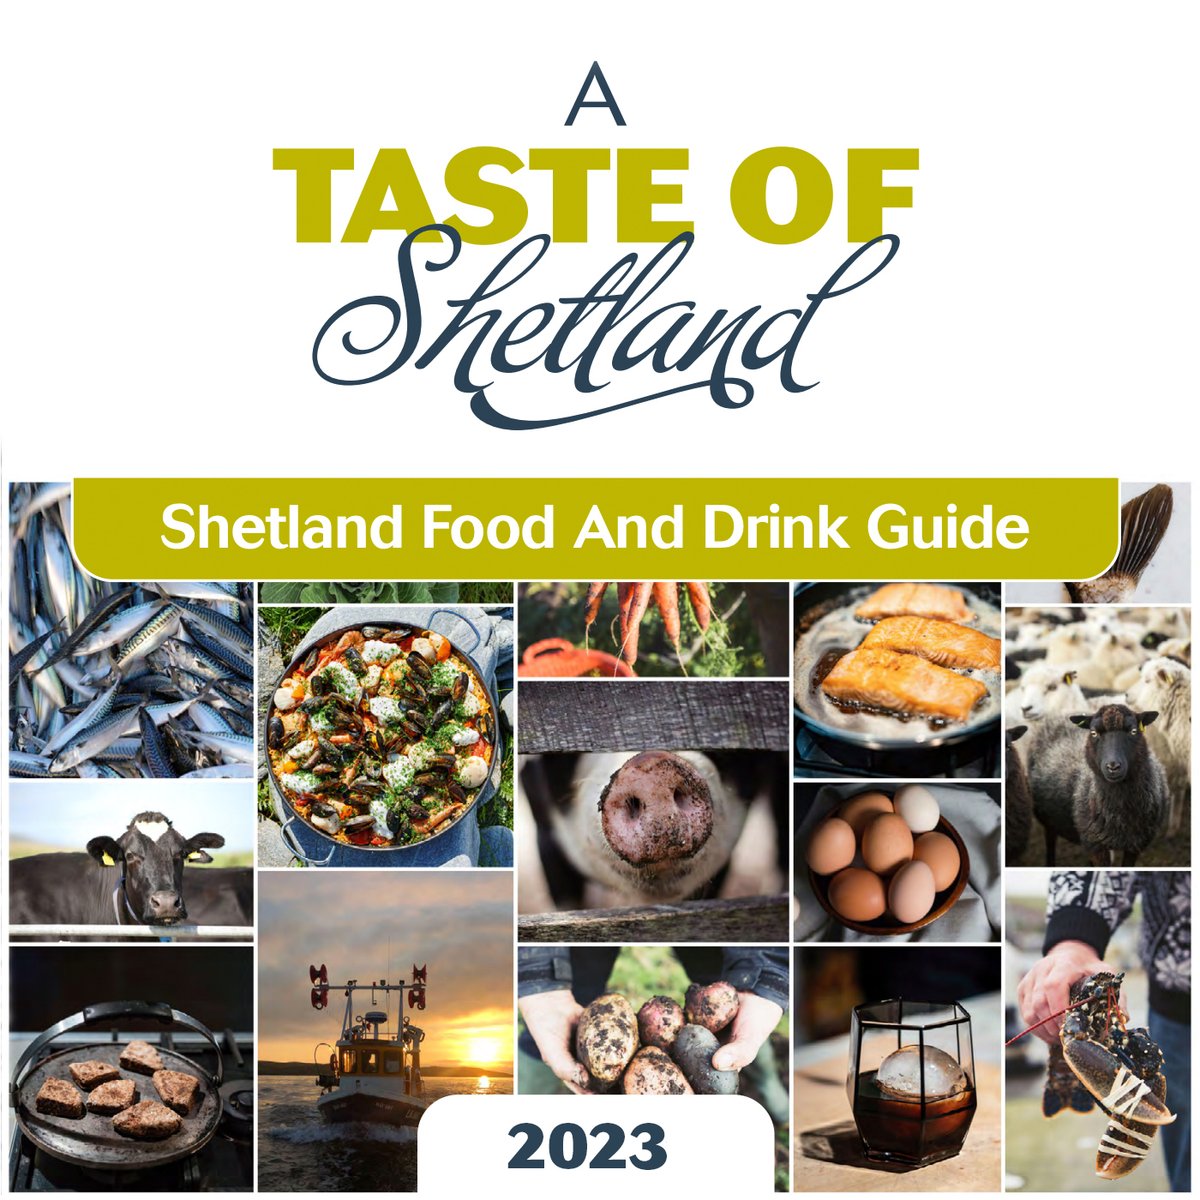 A reminder for food and drink businesses in Shetland - if you want to be included in our Shetland Food and Drink Guide 2023, the deadline for membership subscriptions is the end of the day today. tasteofshetland.com/membership #tasteofshetland